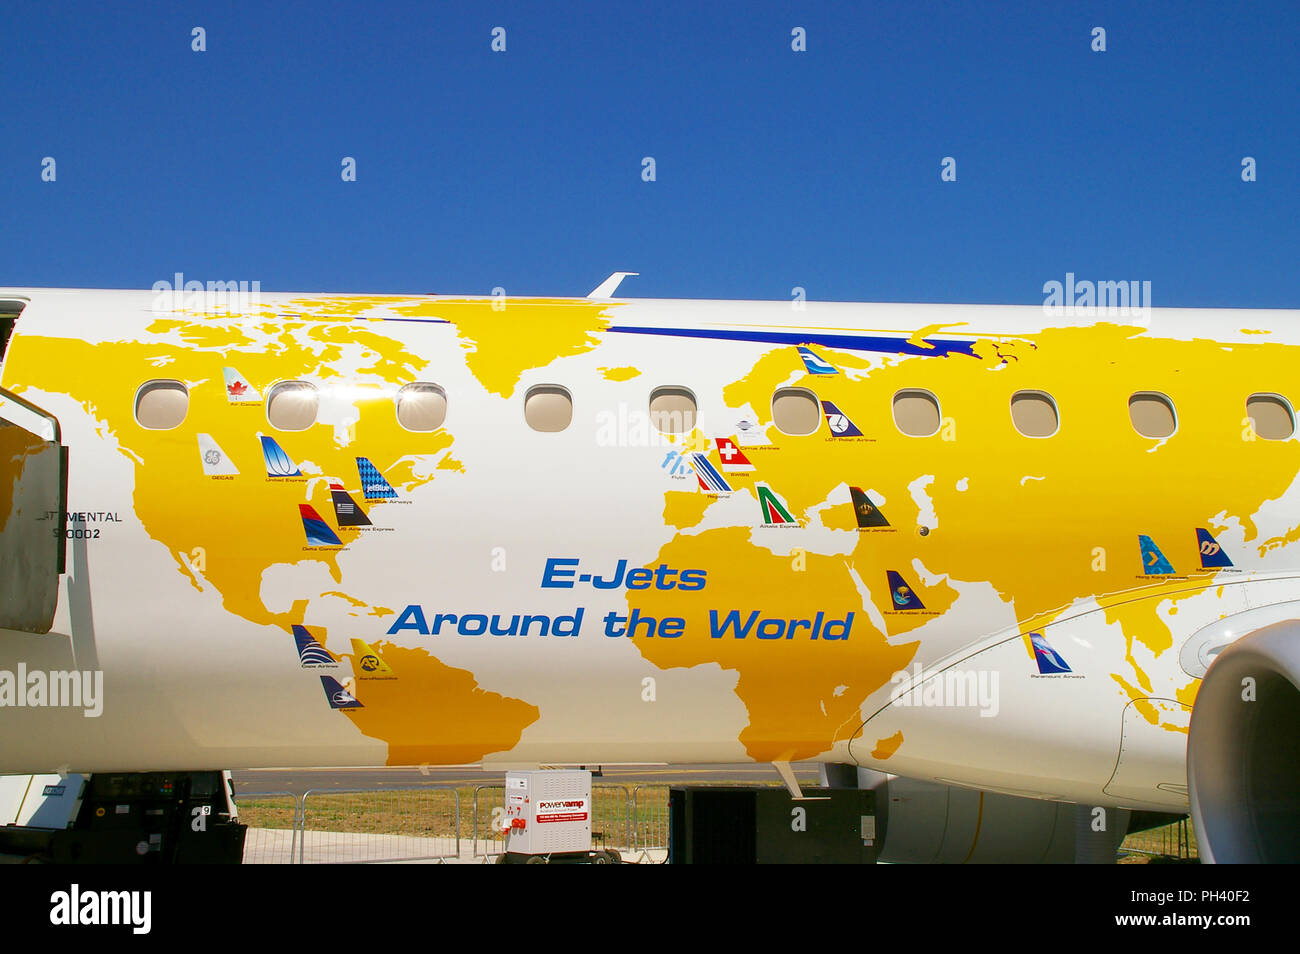 Embraer E-Jets Around the World plane graphic. Family of narrow body medium range twin engine jet airliners developed by the Brazilian firm. World map Stock Photo